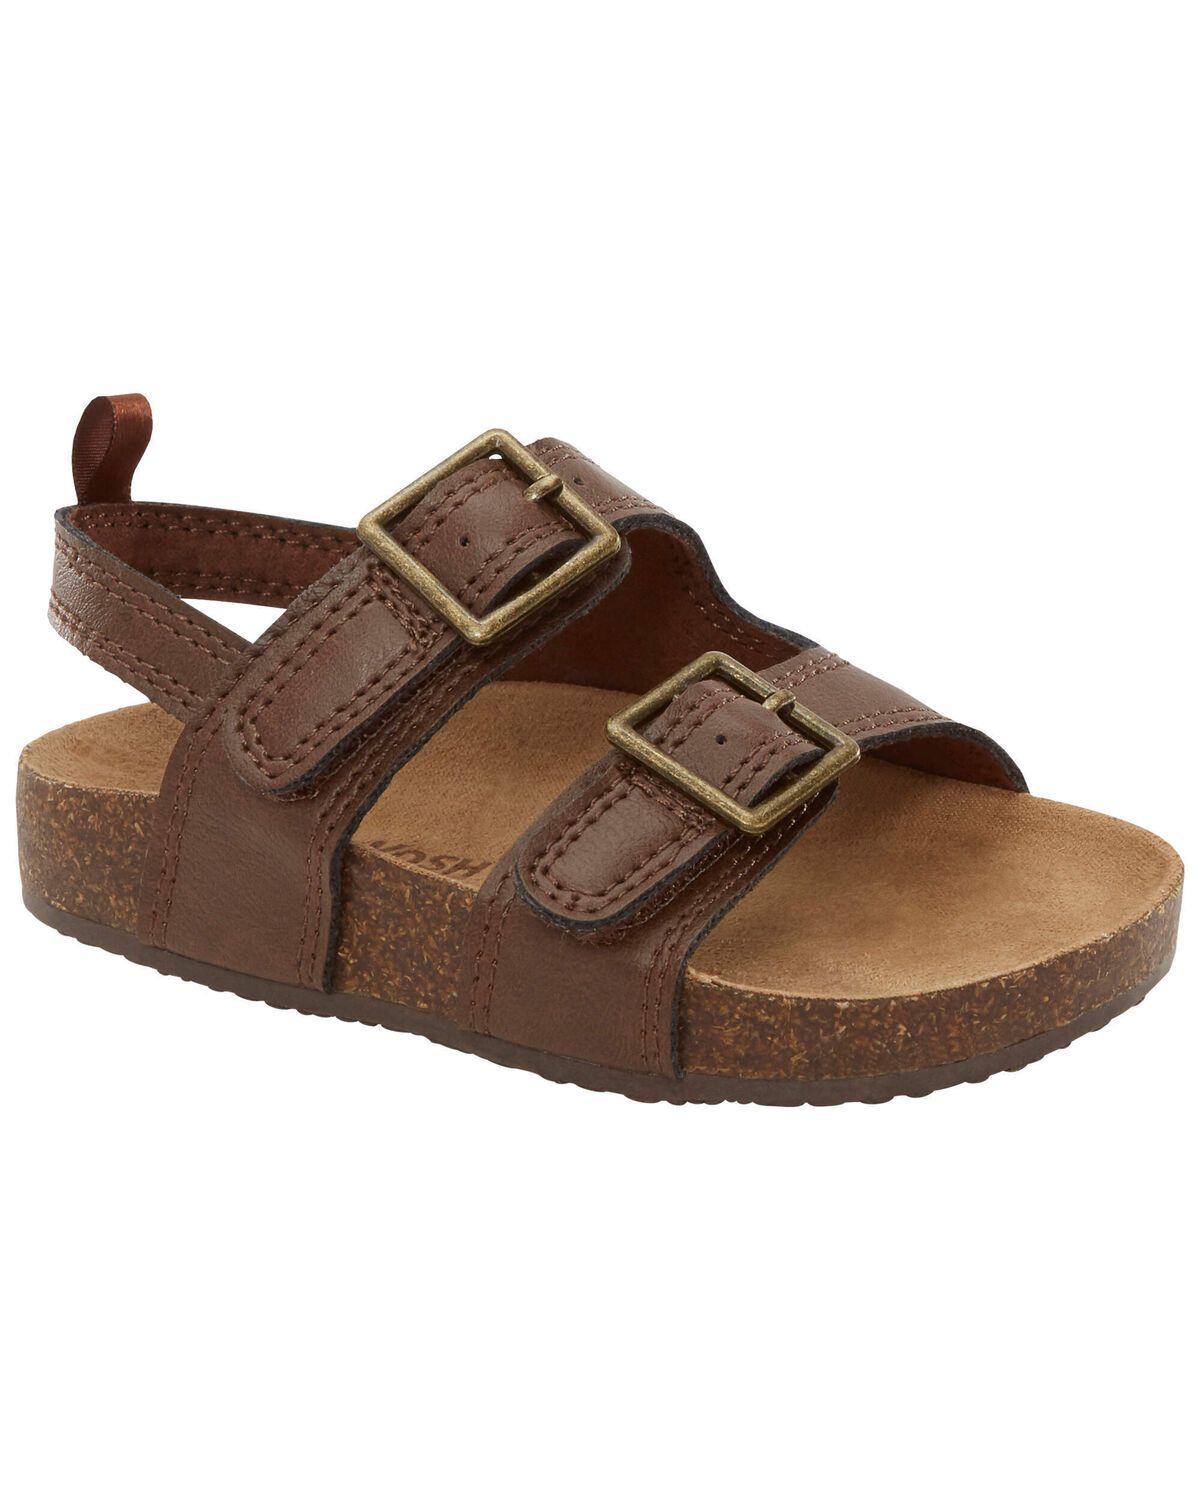 Toddler Everyday Casual Sandals | Carter's